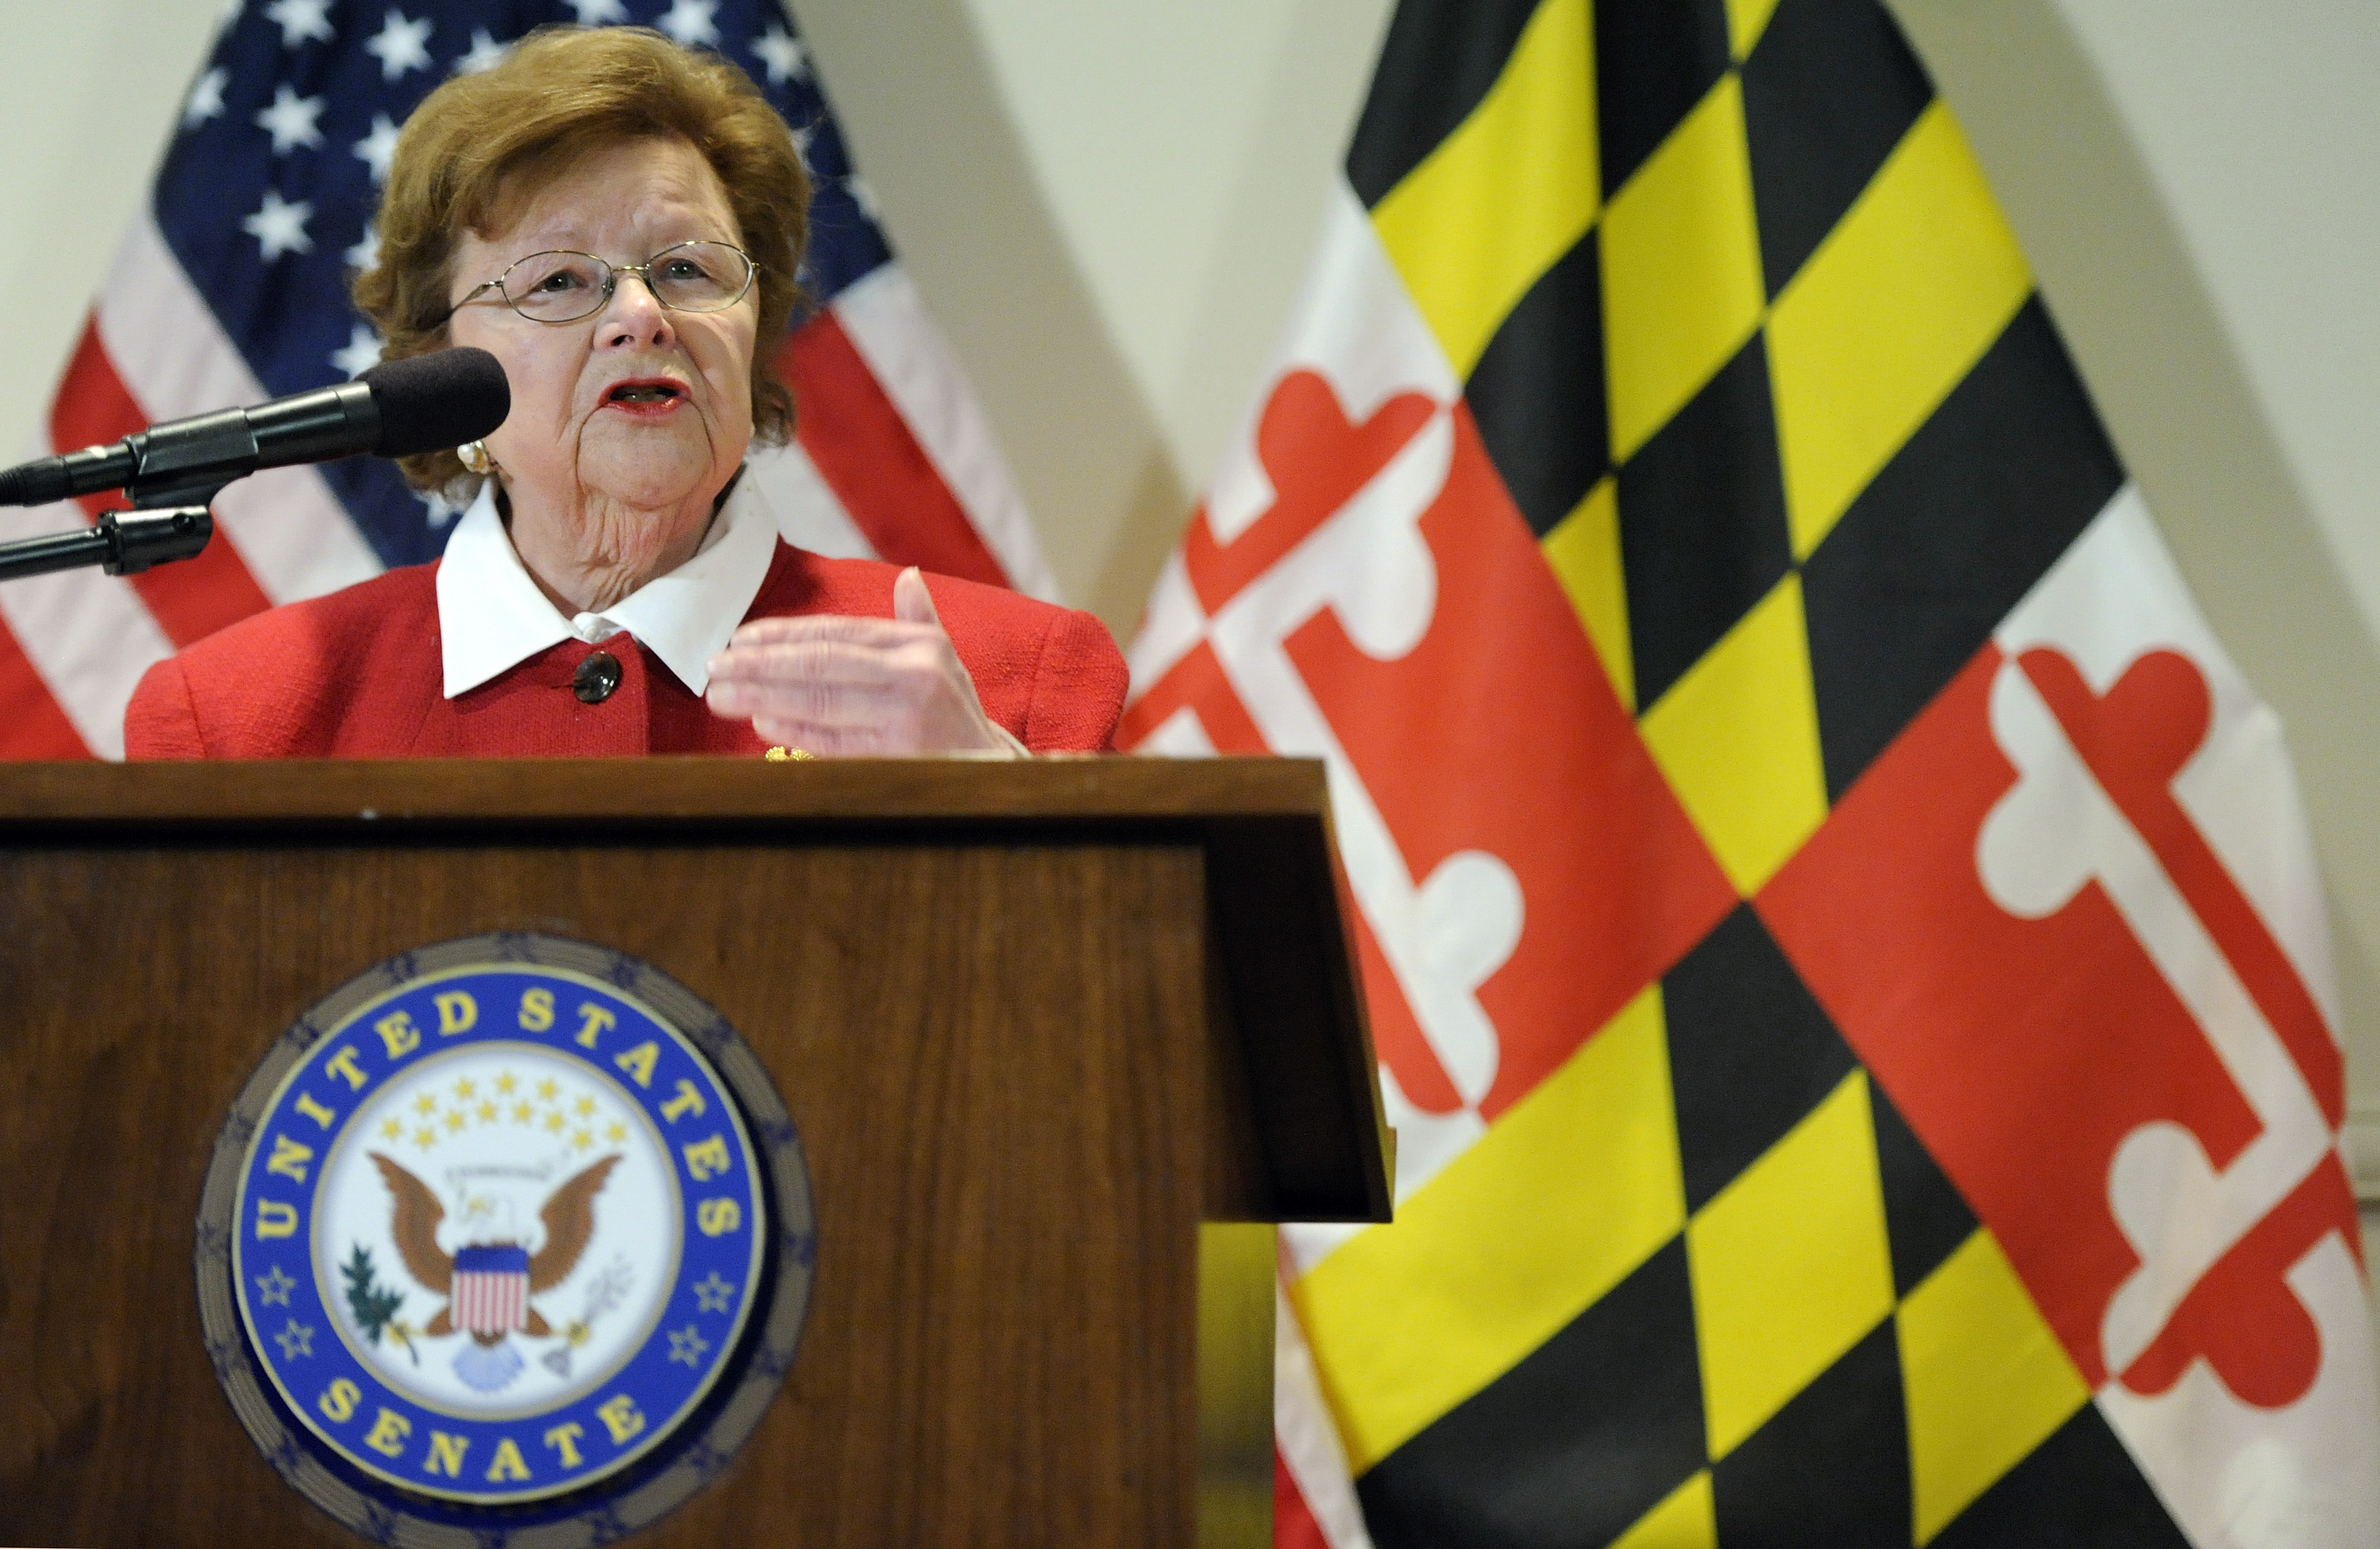 Sen. Barbara Mikulski, D-Md., the longest-serving woman in the history of Congress, speaks during a news conference announcing her retirement after her current term, in the Fells Point section of Baltimore on March 2, 2015. (Steve Ruark—AP)